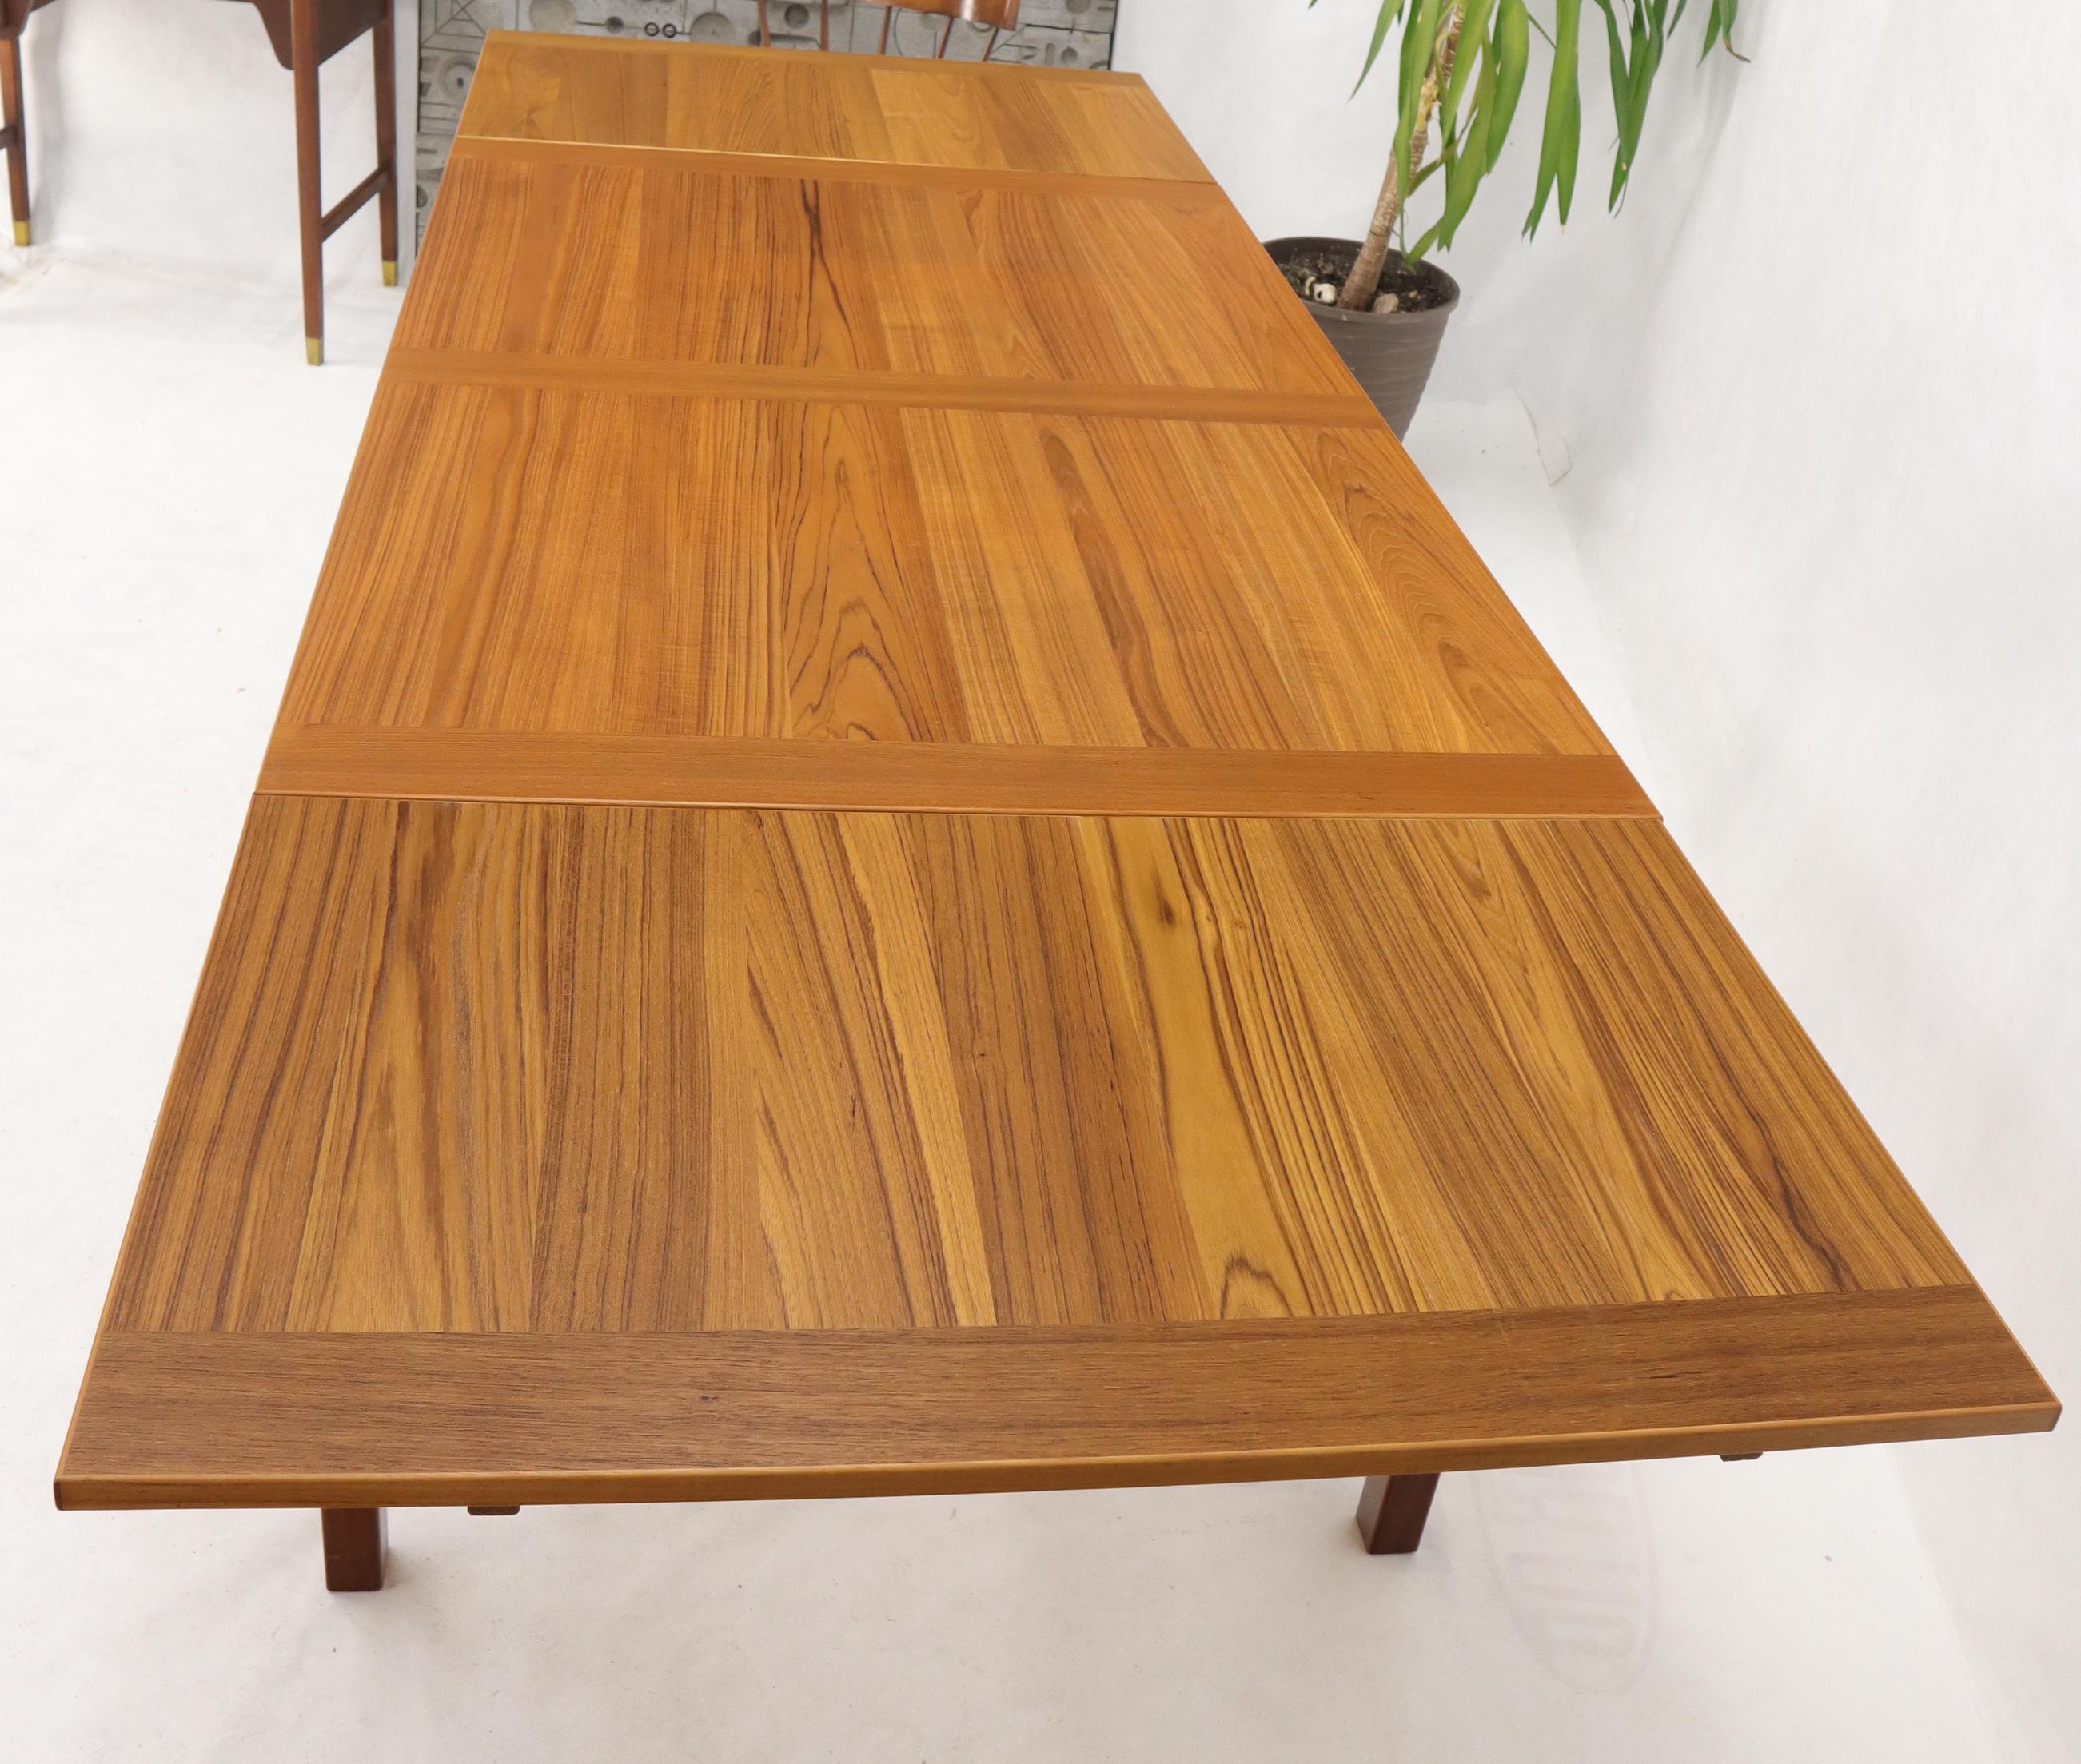 Danish Mid-Century Modern Teak Refectory Dining Table Leaves For Sale 4